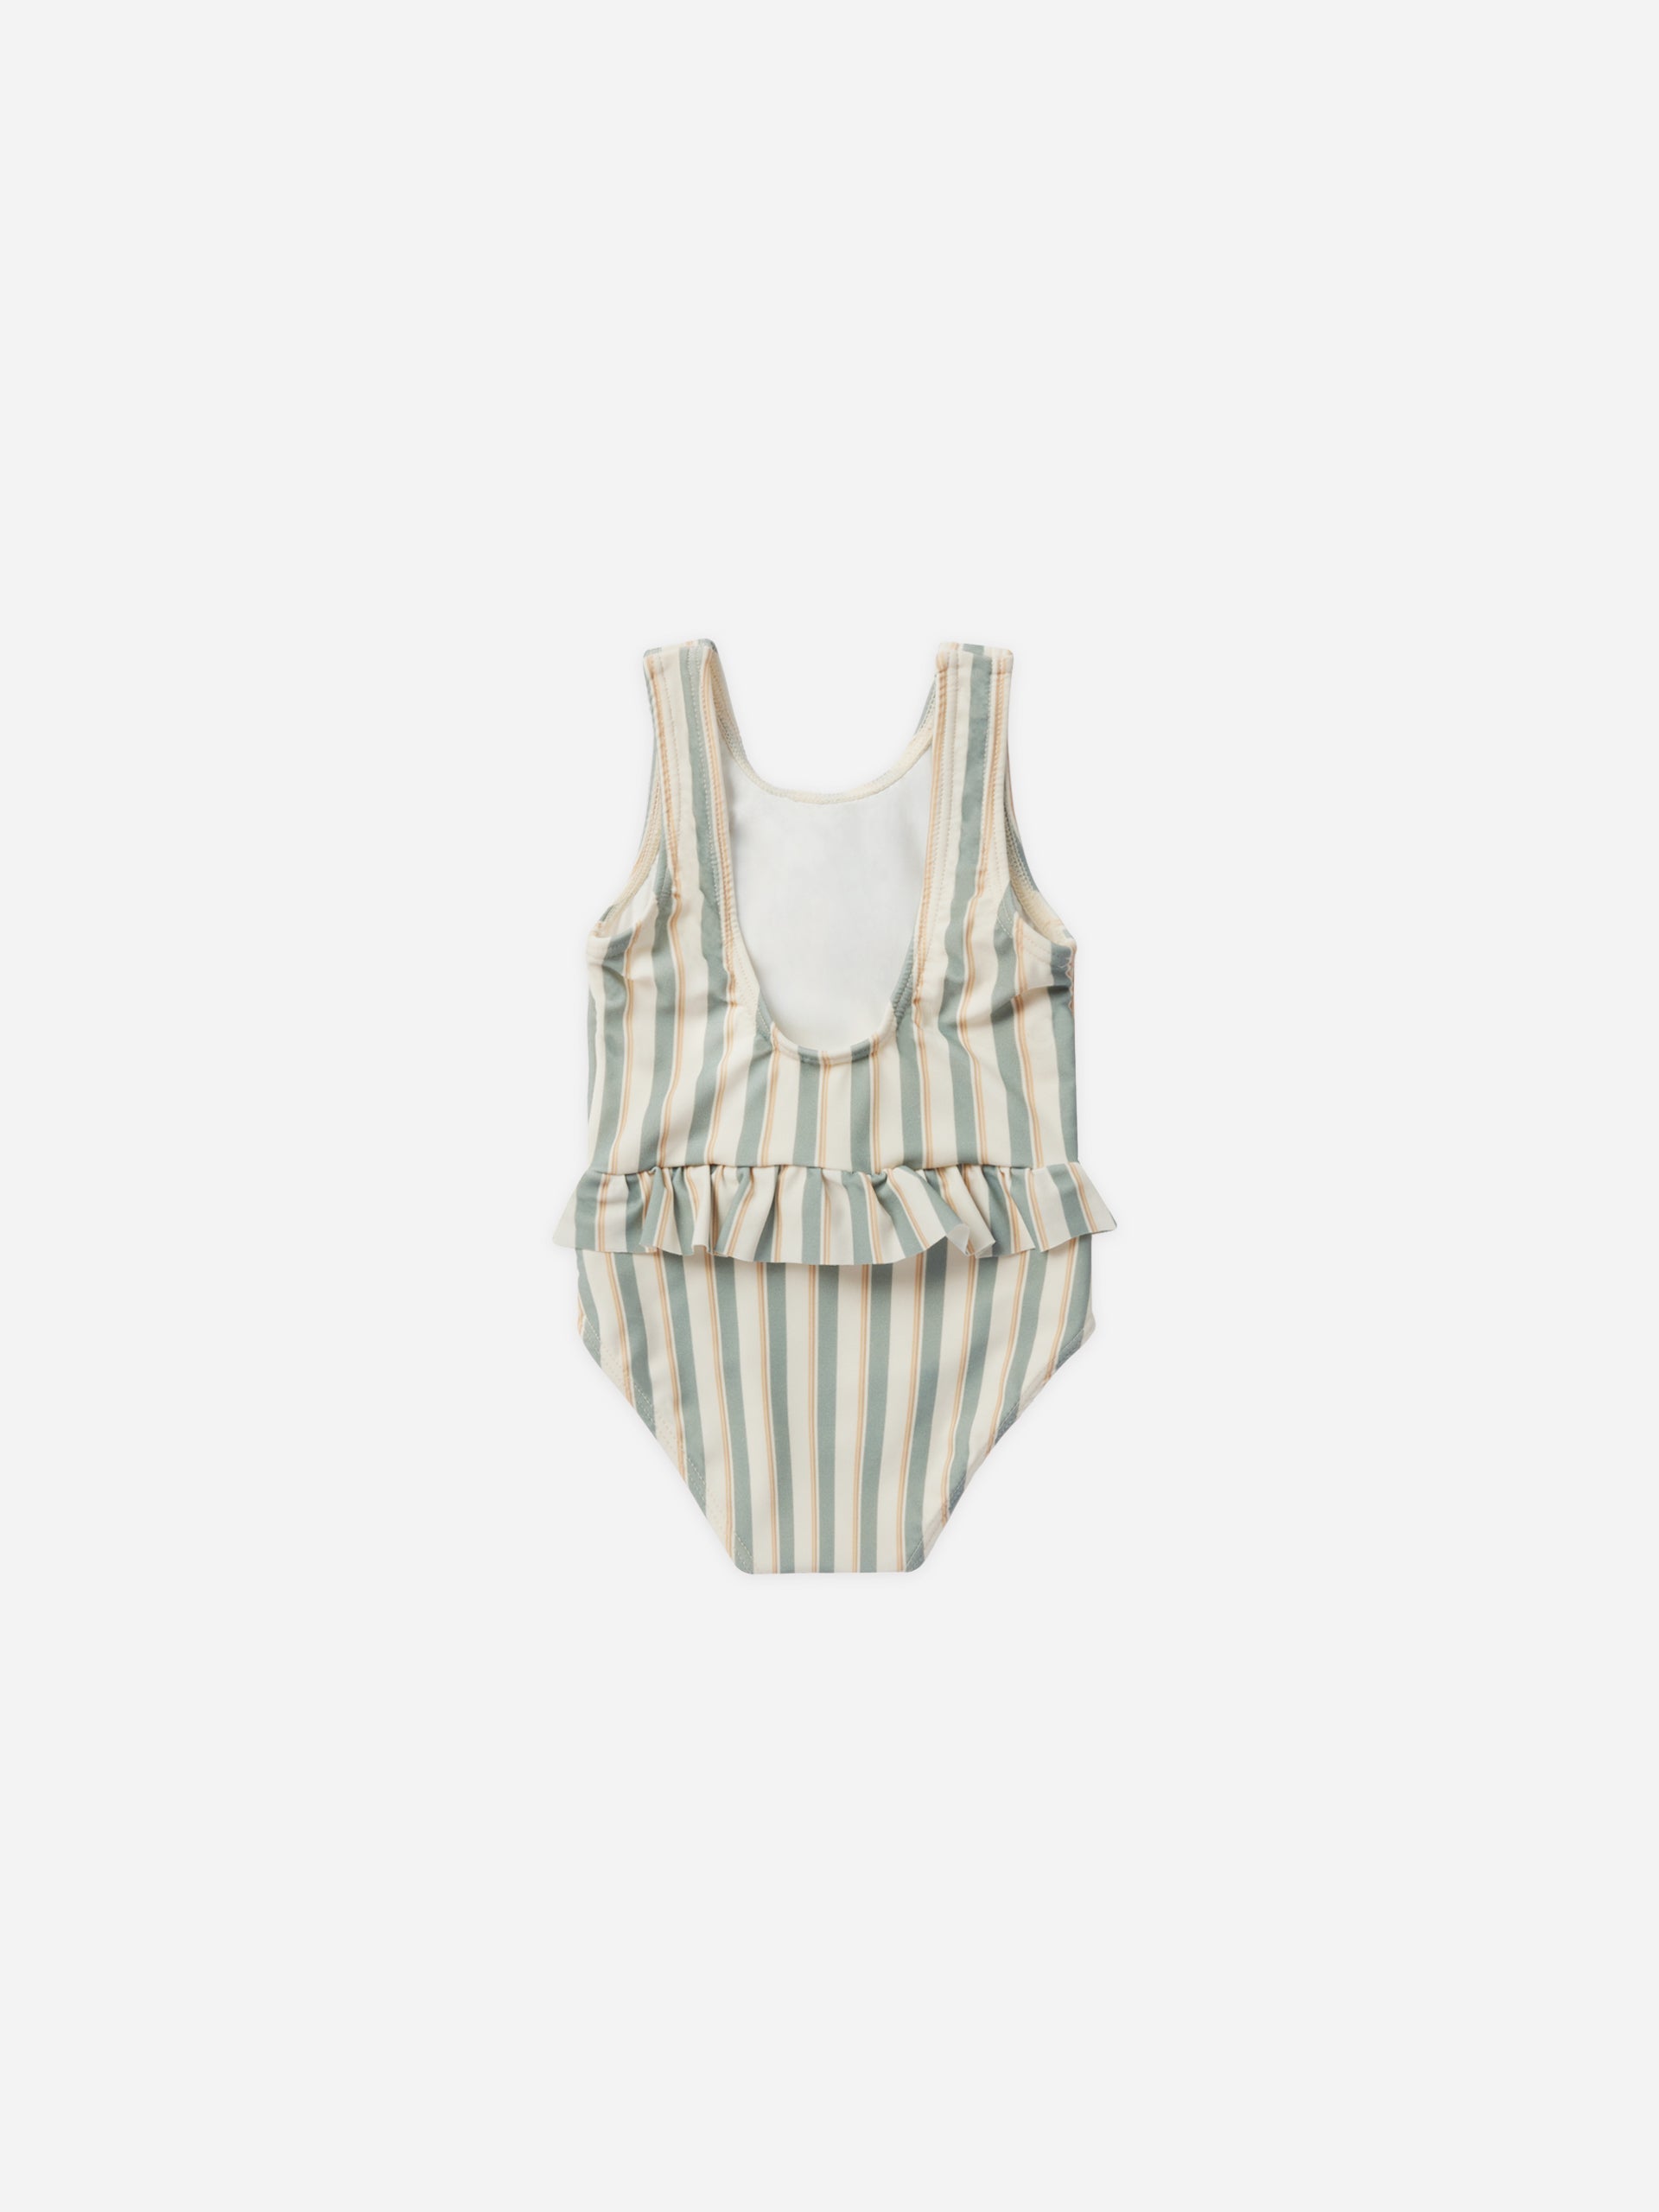 Skirted One-Piece || Aqua Stripe - Rylee + Cru | Kids Clothes | Trendy Baby Clothes | Modern Infant Outfits |